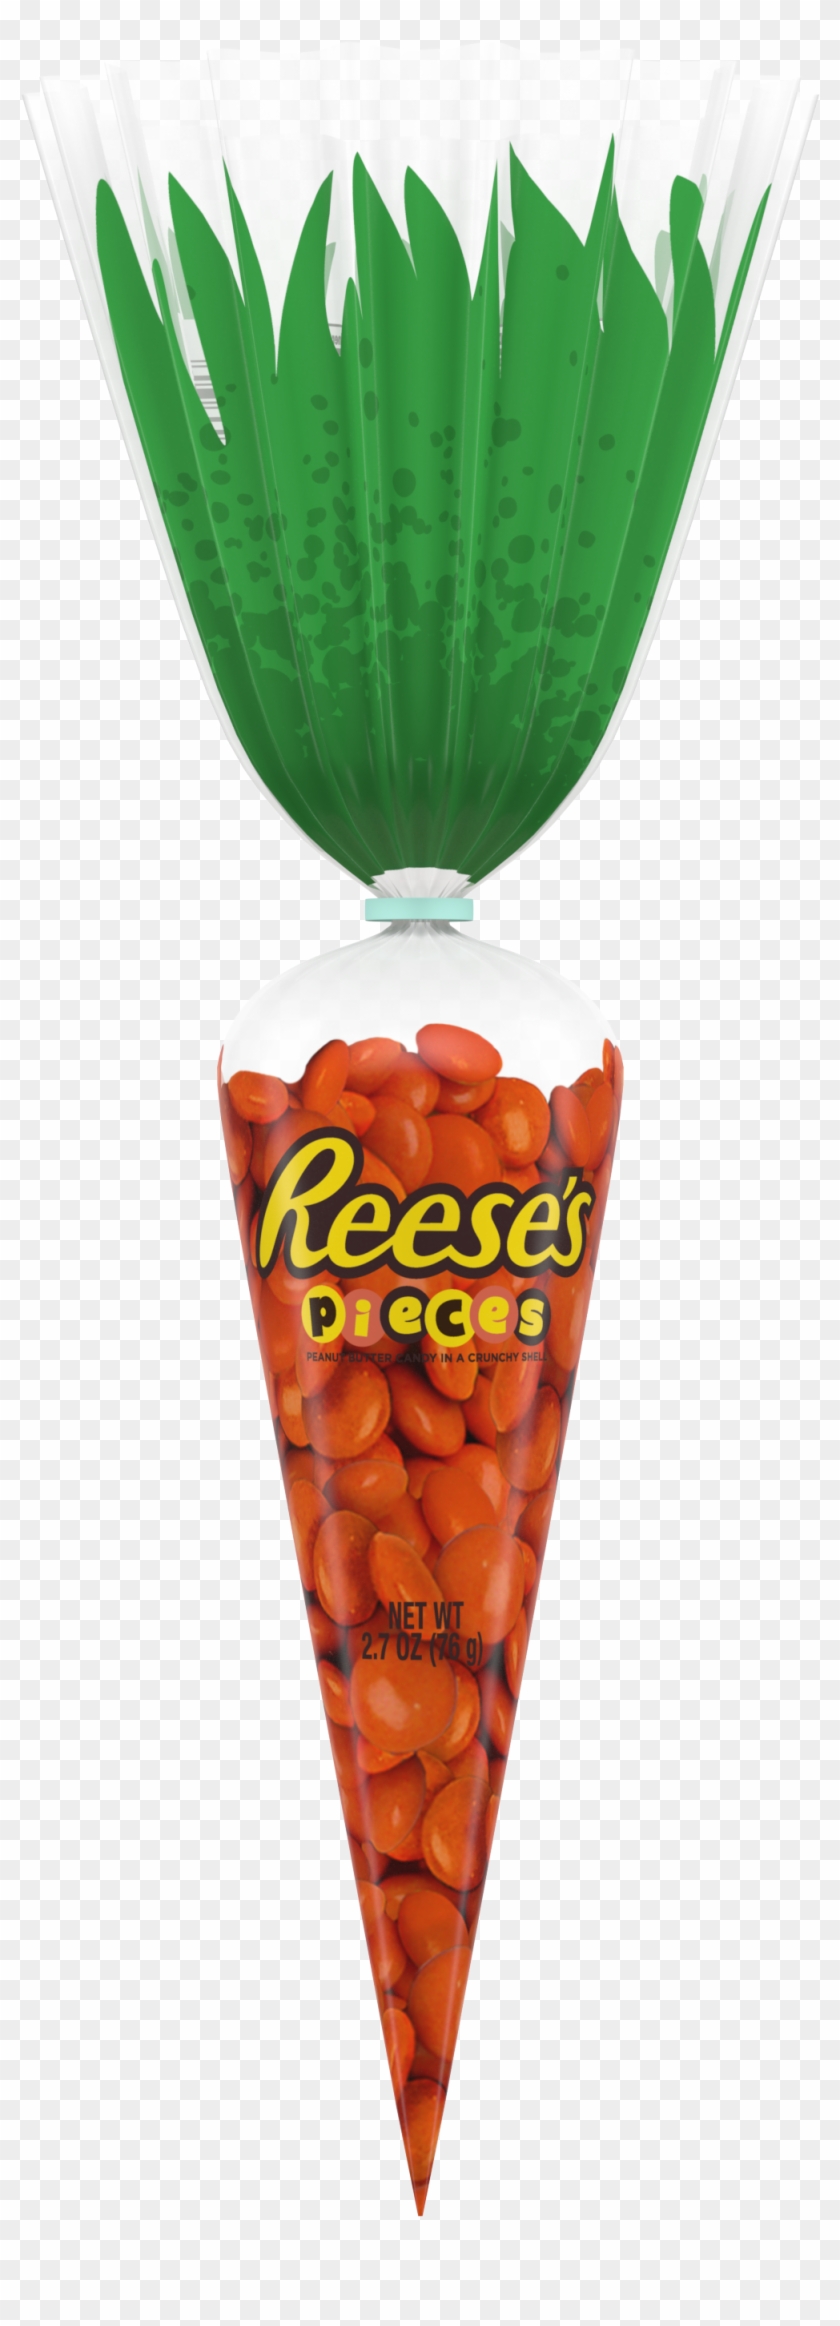 Reese's Pieces Easter Carrot Bag Candy, - Reese's Peanut Butter Cups Clipart #5241983